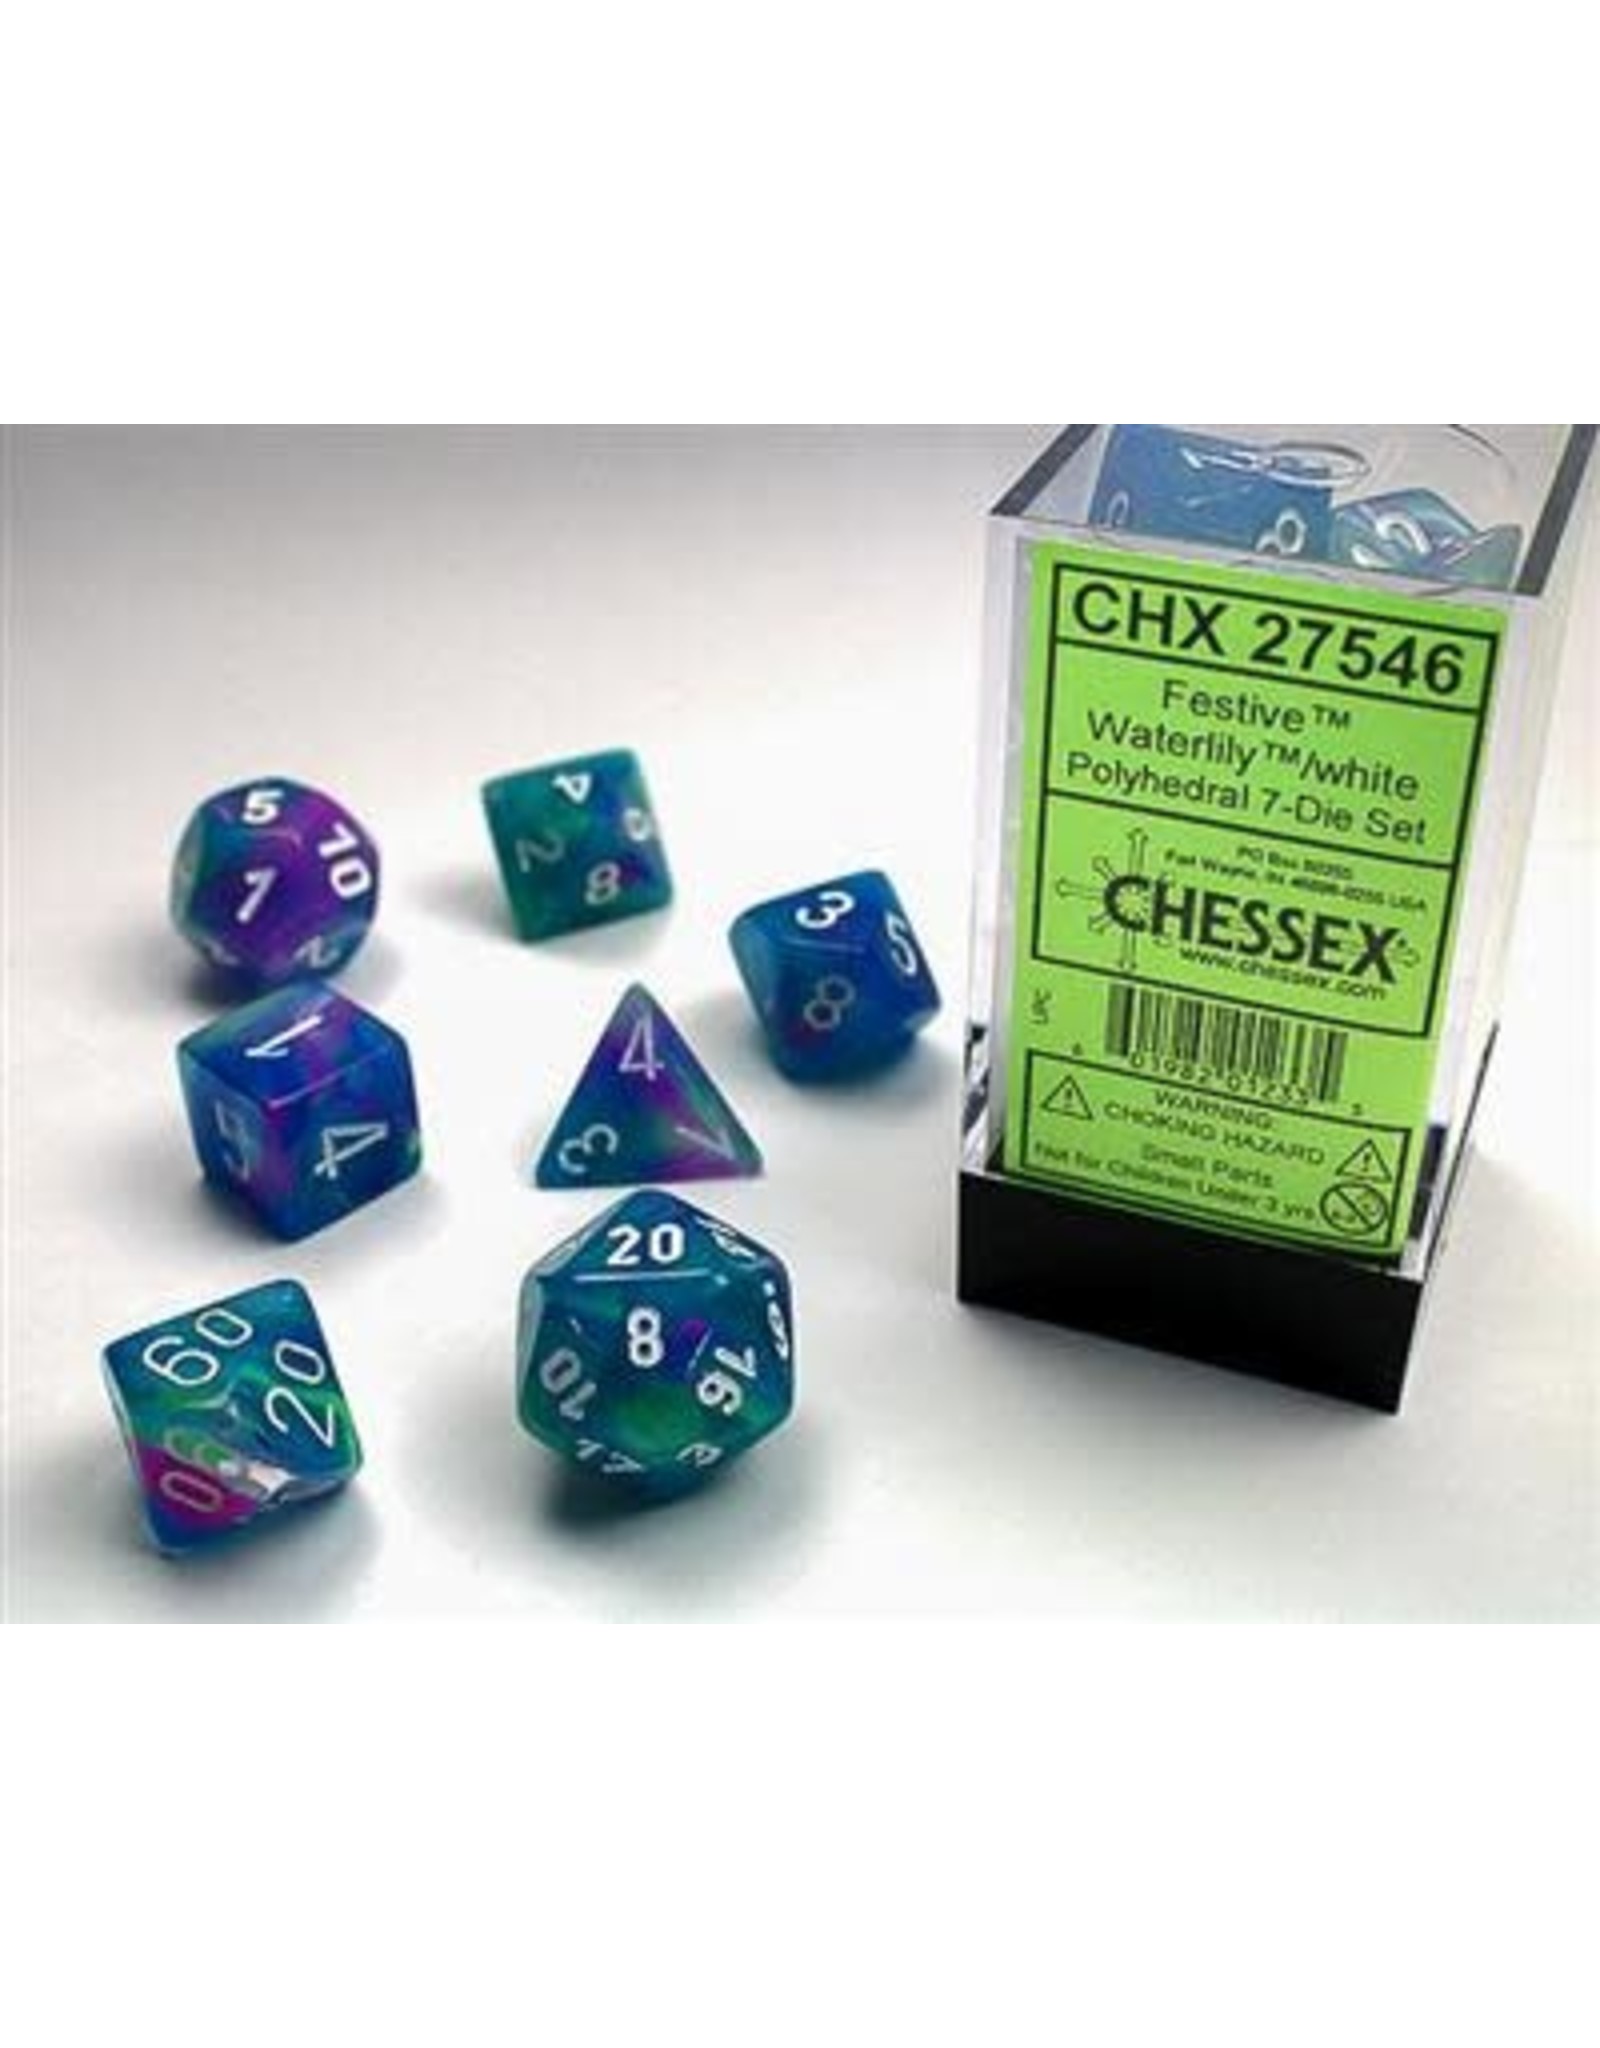 Chessex RPG Dice Set: 7-Set Festive® Polyhedral Waterlily™/white